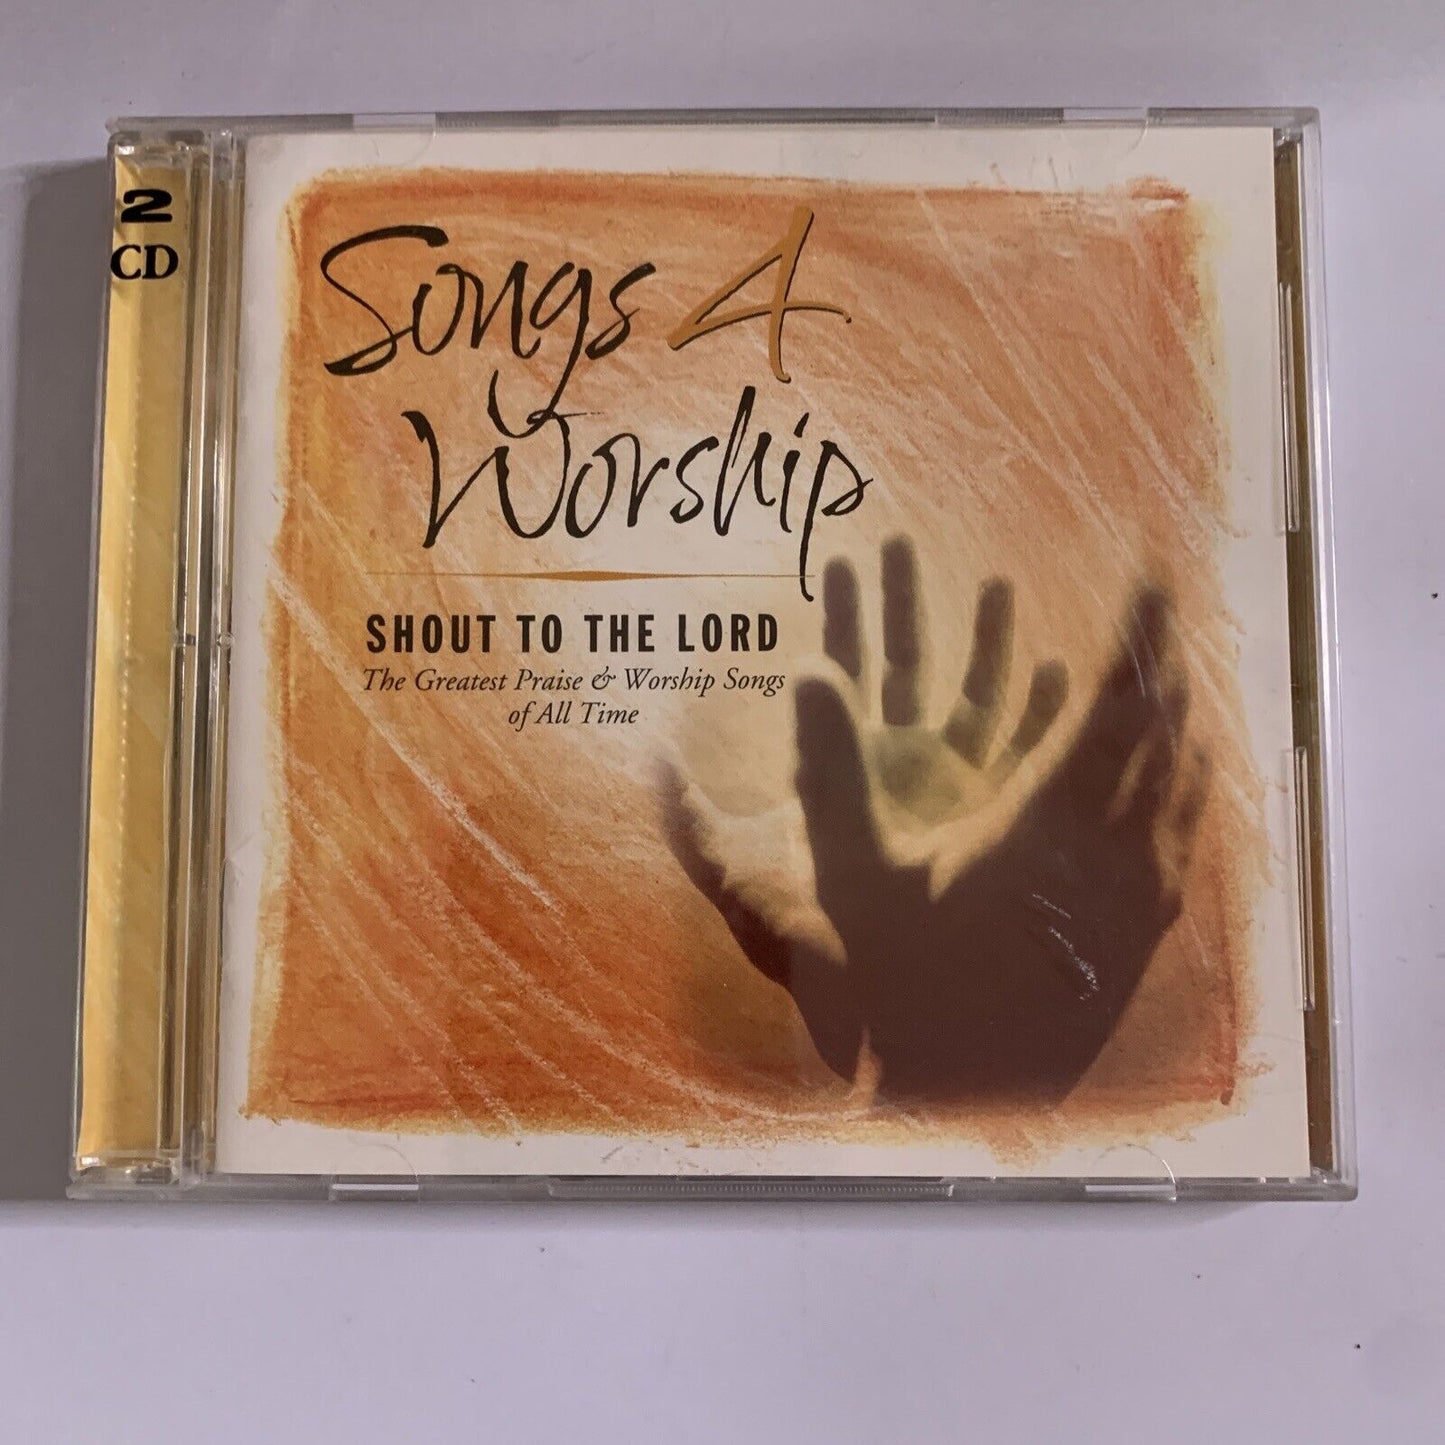 Songs 4 Worship Shout To The Lord. The Greatest Praise & Worship Songs (CD,2001)